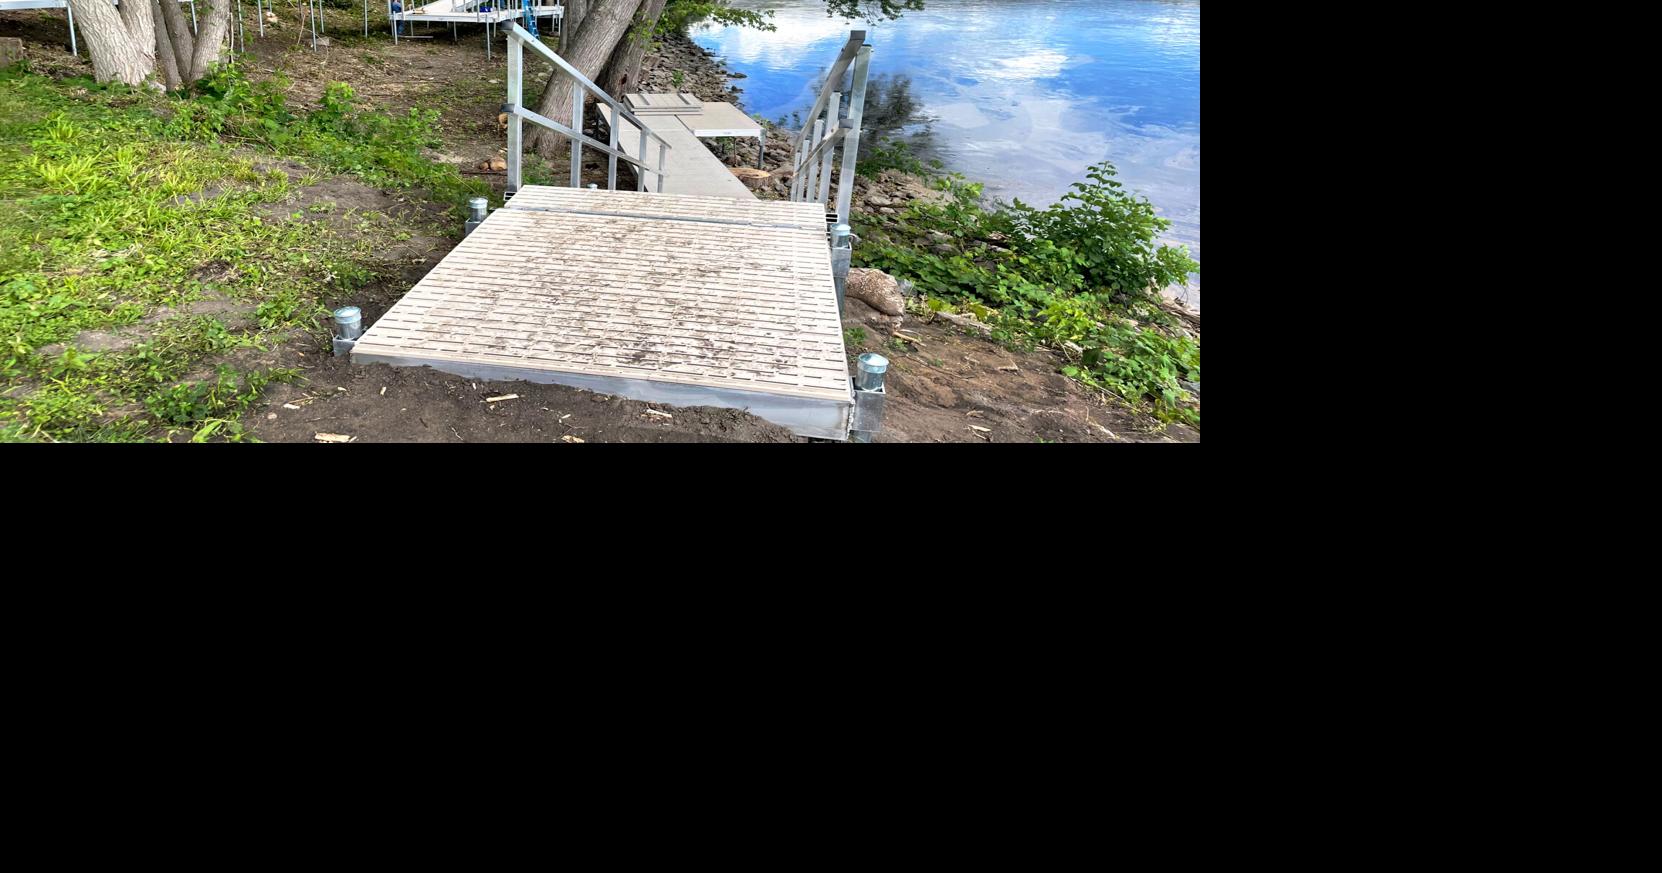 MN Boardwalks manufactures Floating Fishing Pier Docks and